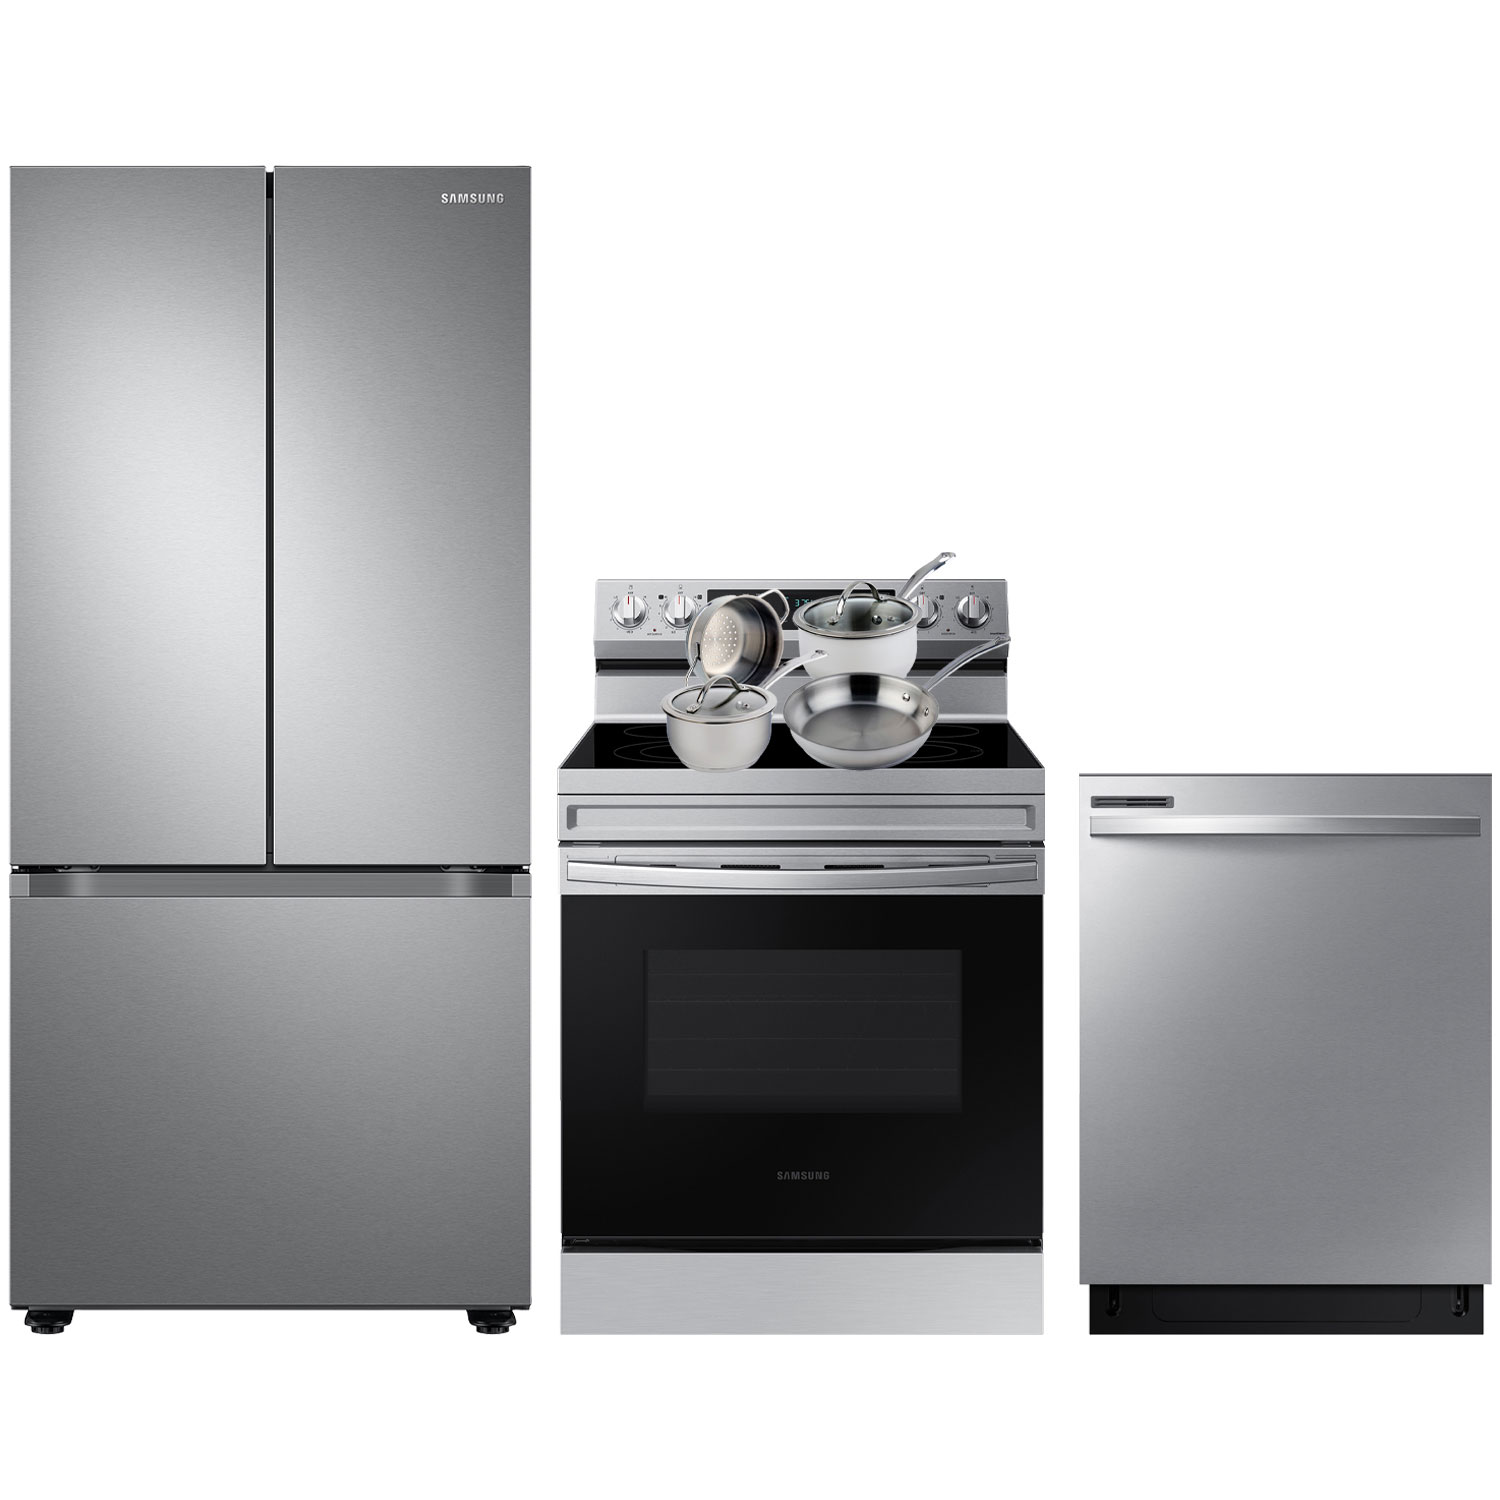 Samsung 30" 22.1 Cu. Ft. French Door Refrigerator; Electric Range; Dishwasher; Cookware Set - Stainless